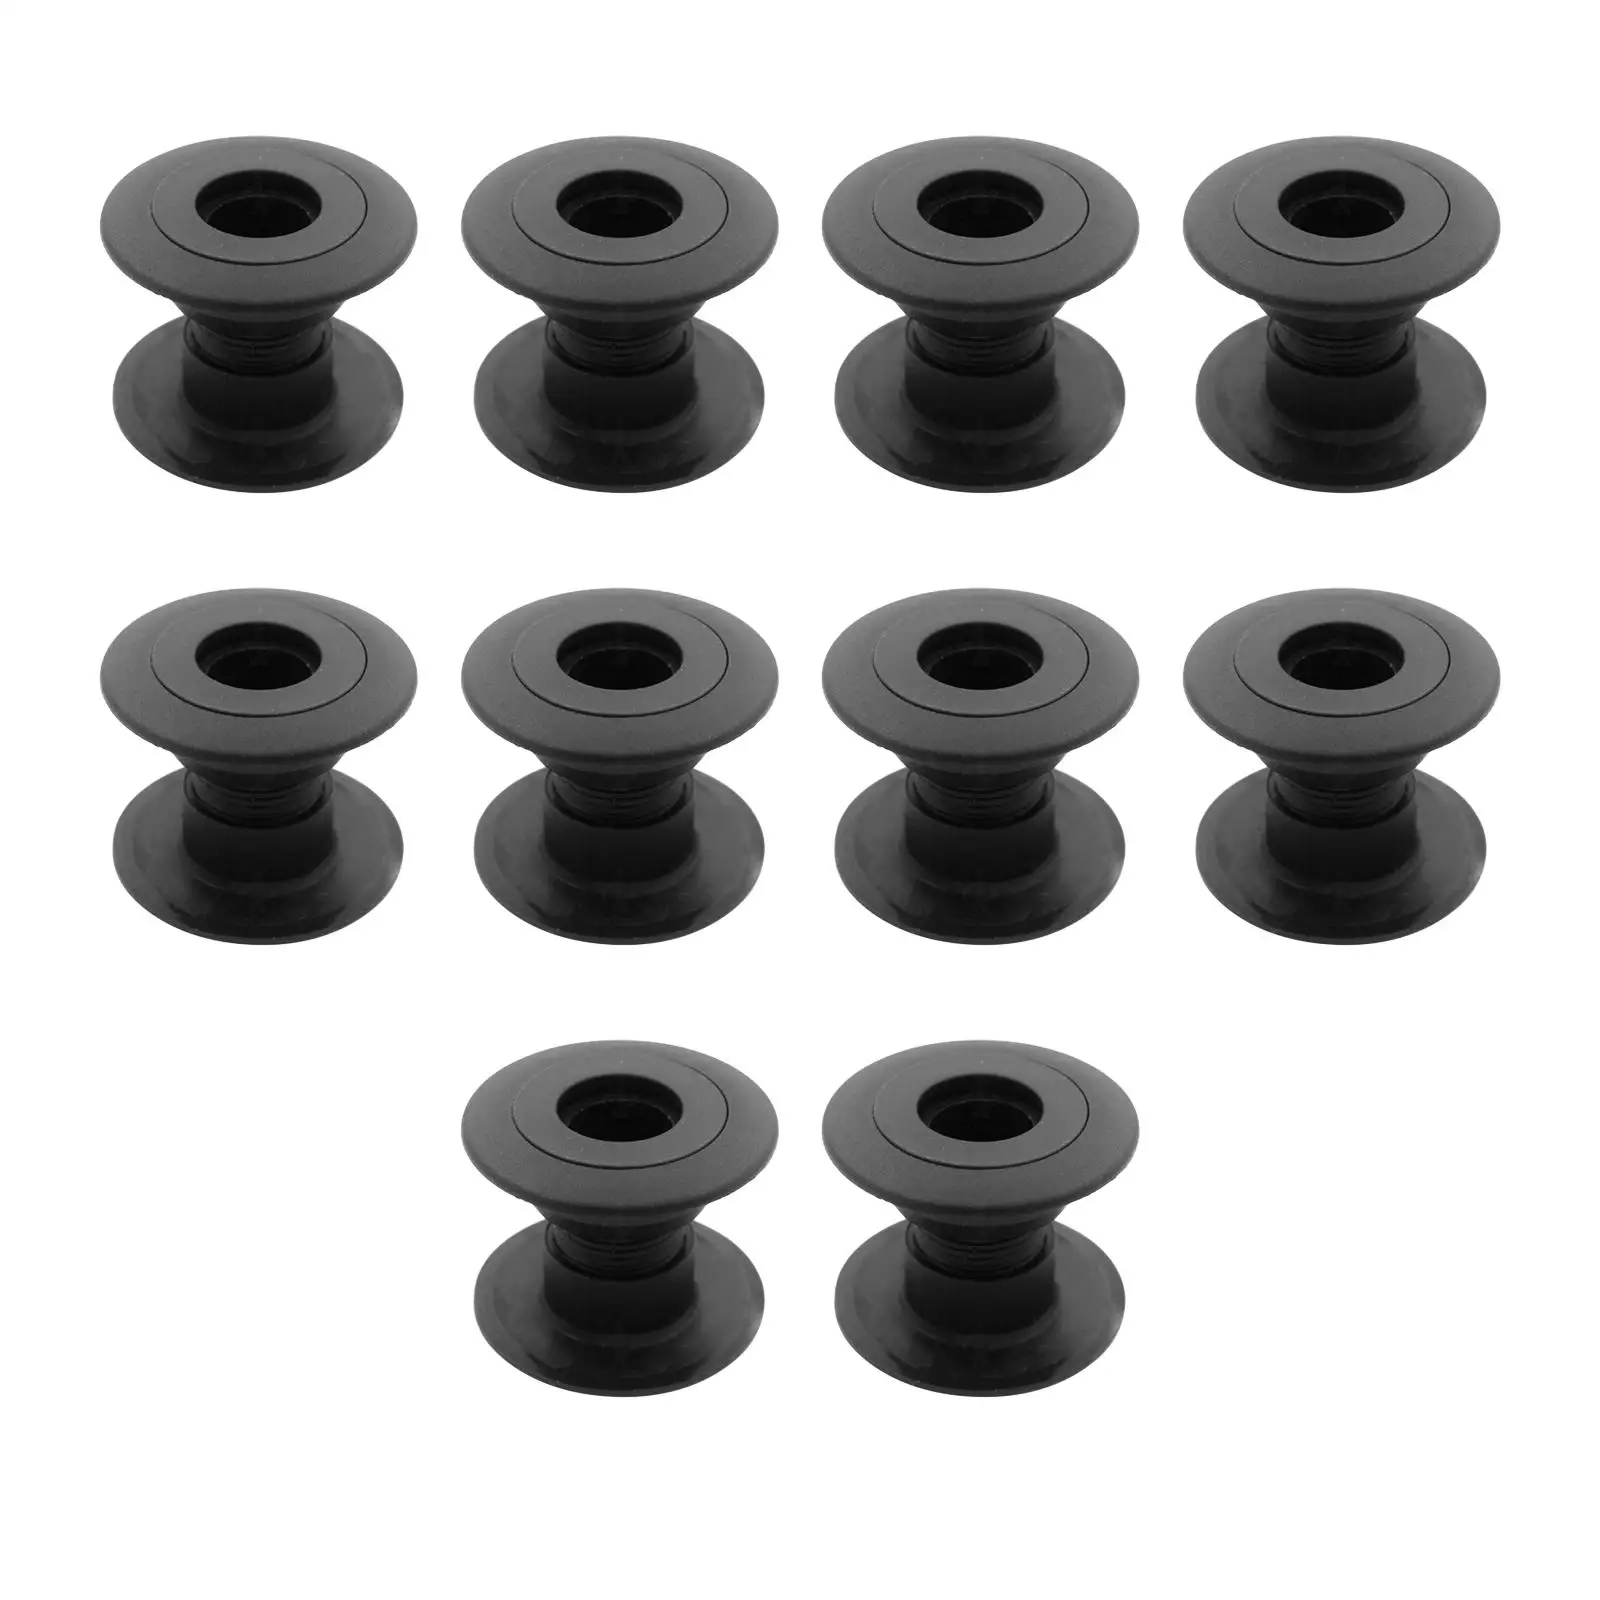 Table Football Bearing Rods Threaded Structure Foosball Bushings Durable Games for Standard Foosball Tables Replacement